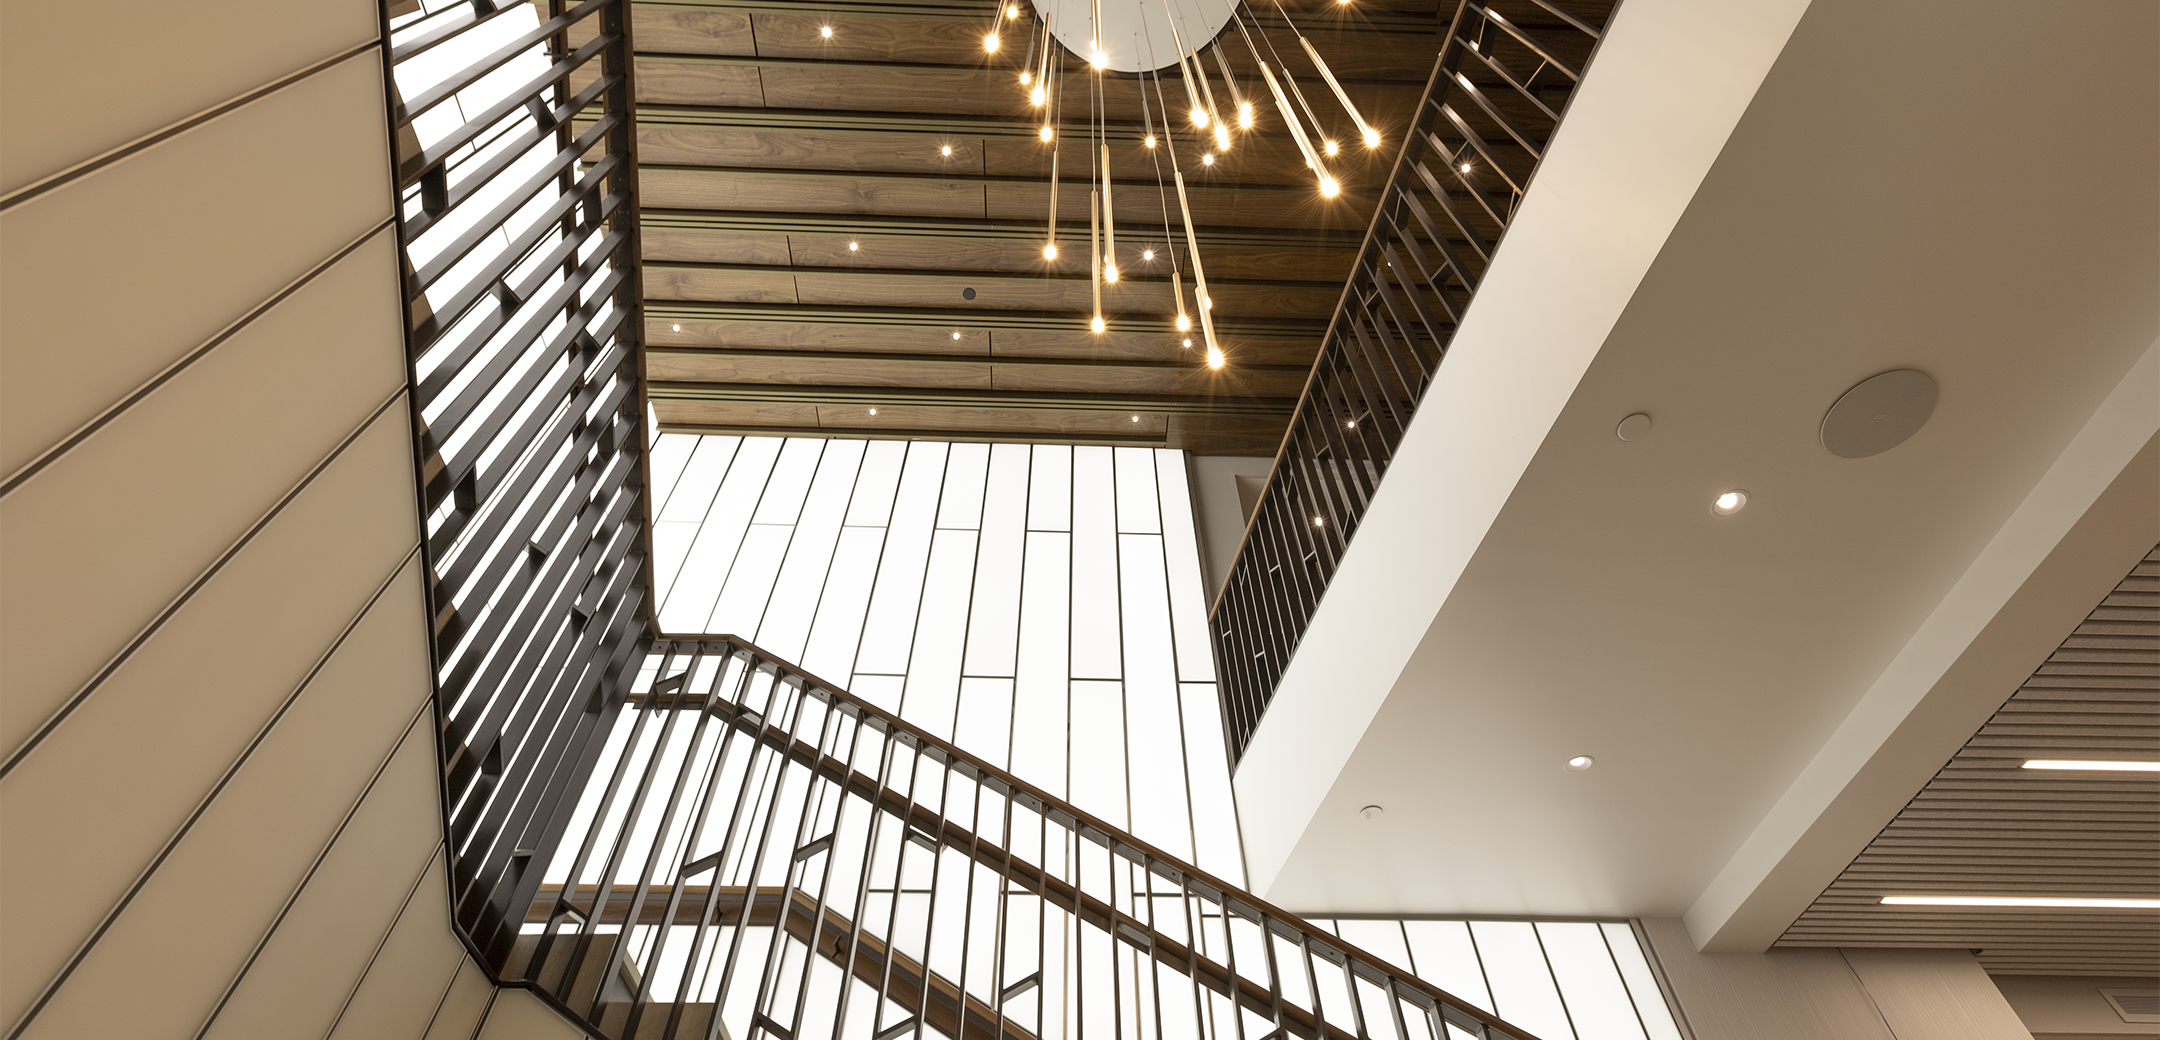 A bottom to top interior view of the Cohen Seglias staircase showcasing the light panel walls, brass colored metal ornate railings and a probe length hanging chandelier.